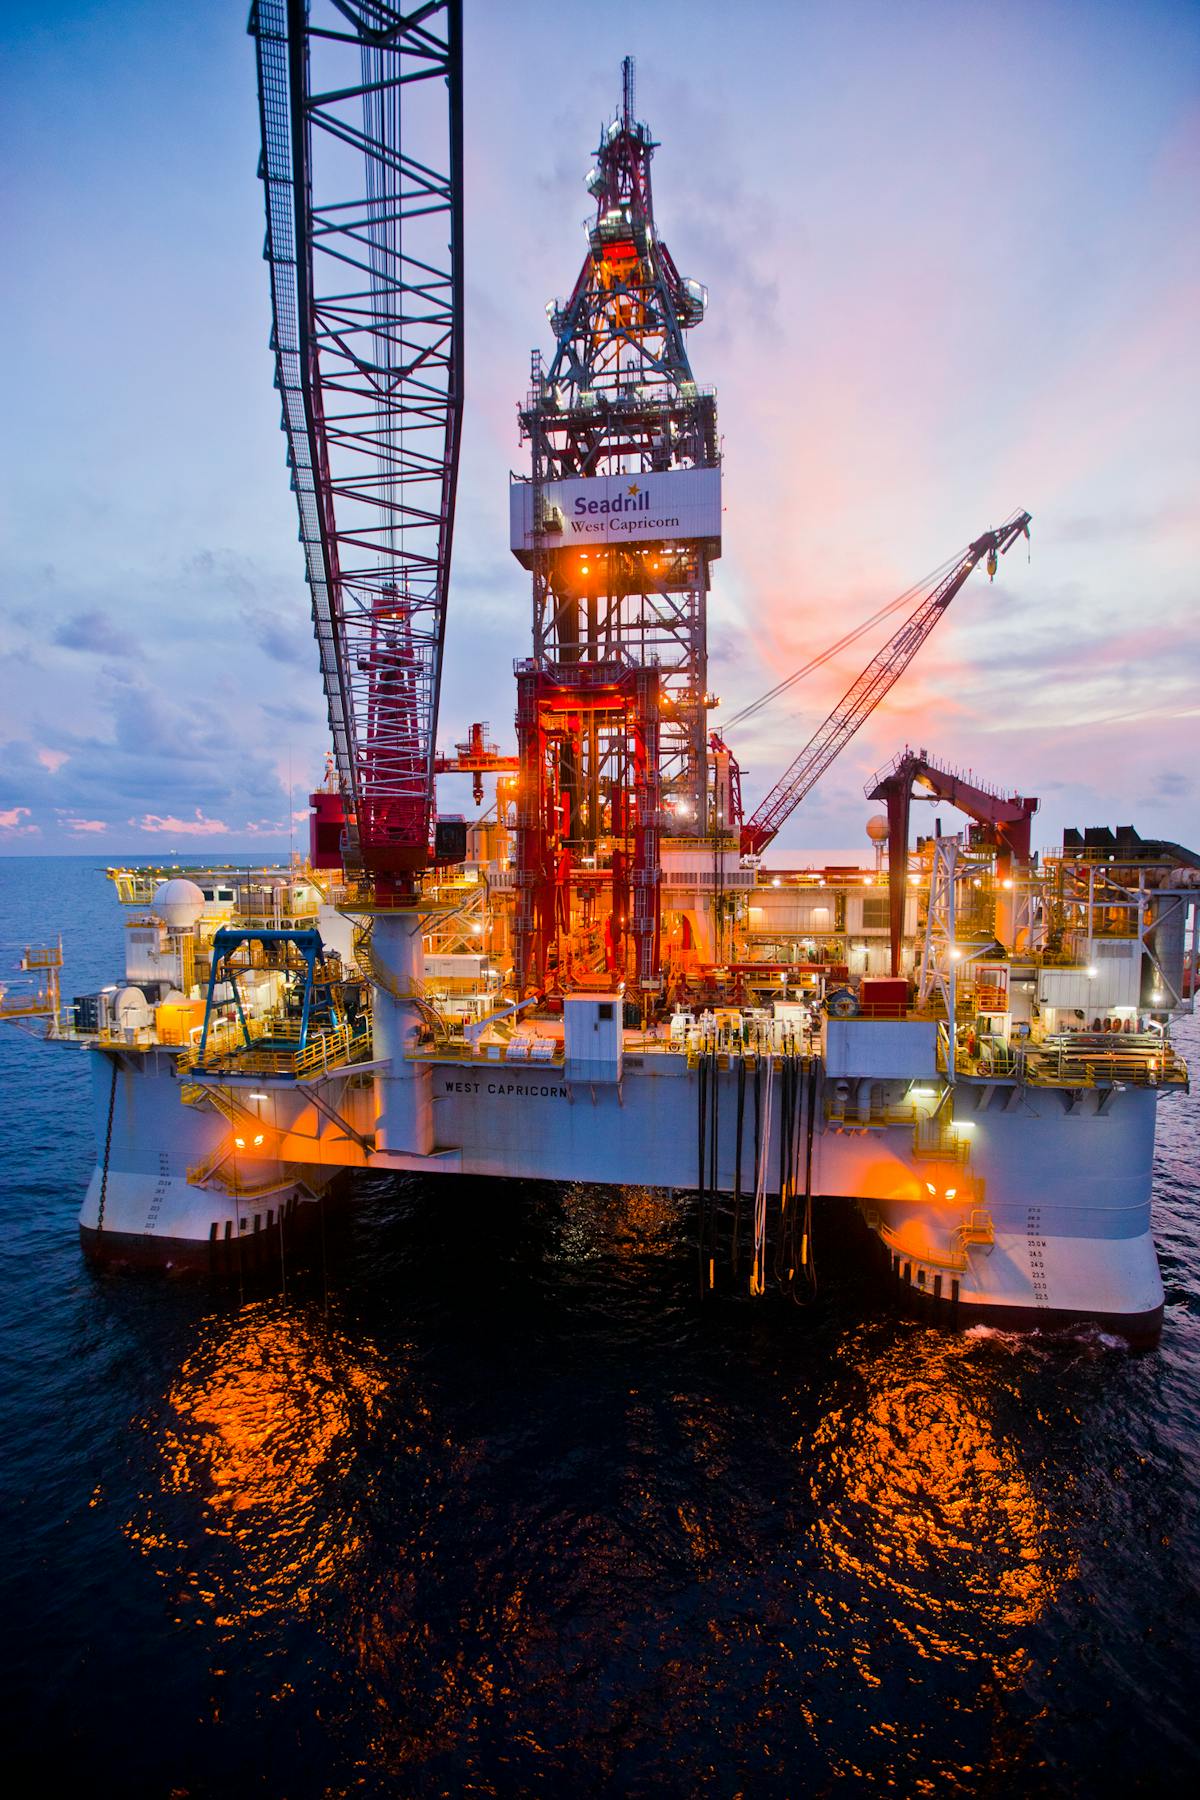 The Seadrill West Capricorn drilled the Resolution prospect in the Garden Banks area in 4Q 2019.